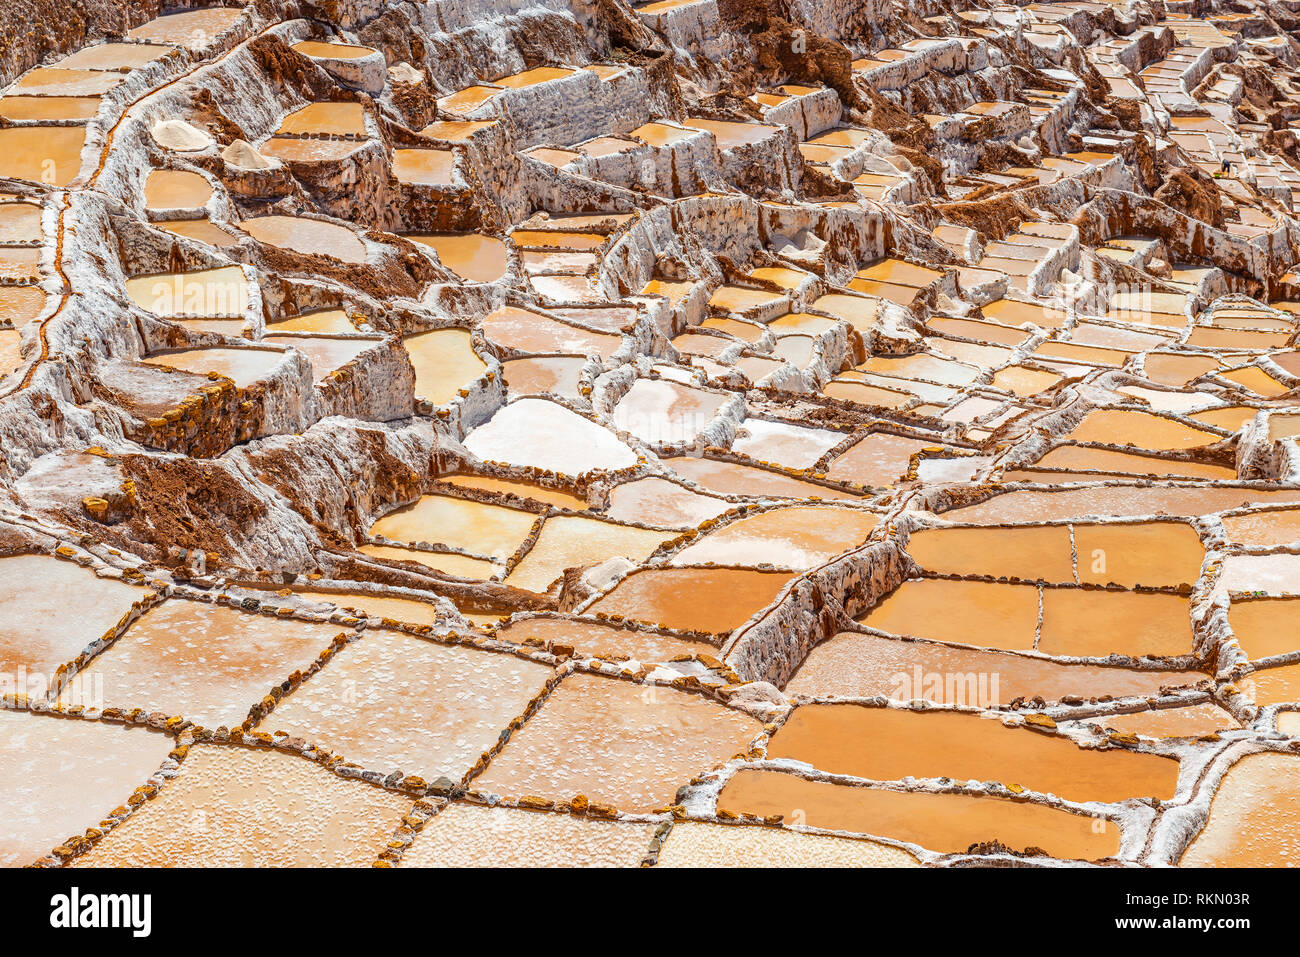 Landscape of the Maras salt terraces in the Sacred Valley of the Inca, Cusco, Peru. Stock Photo